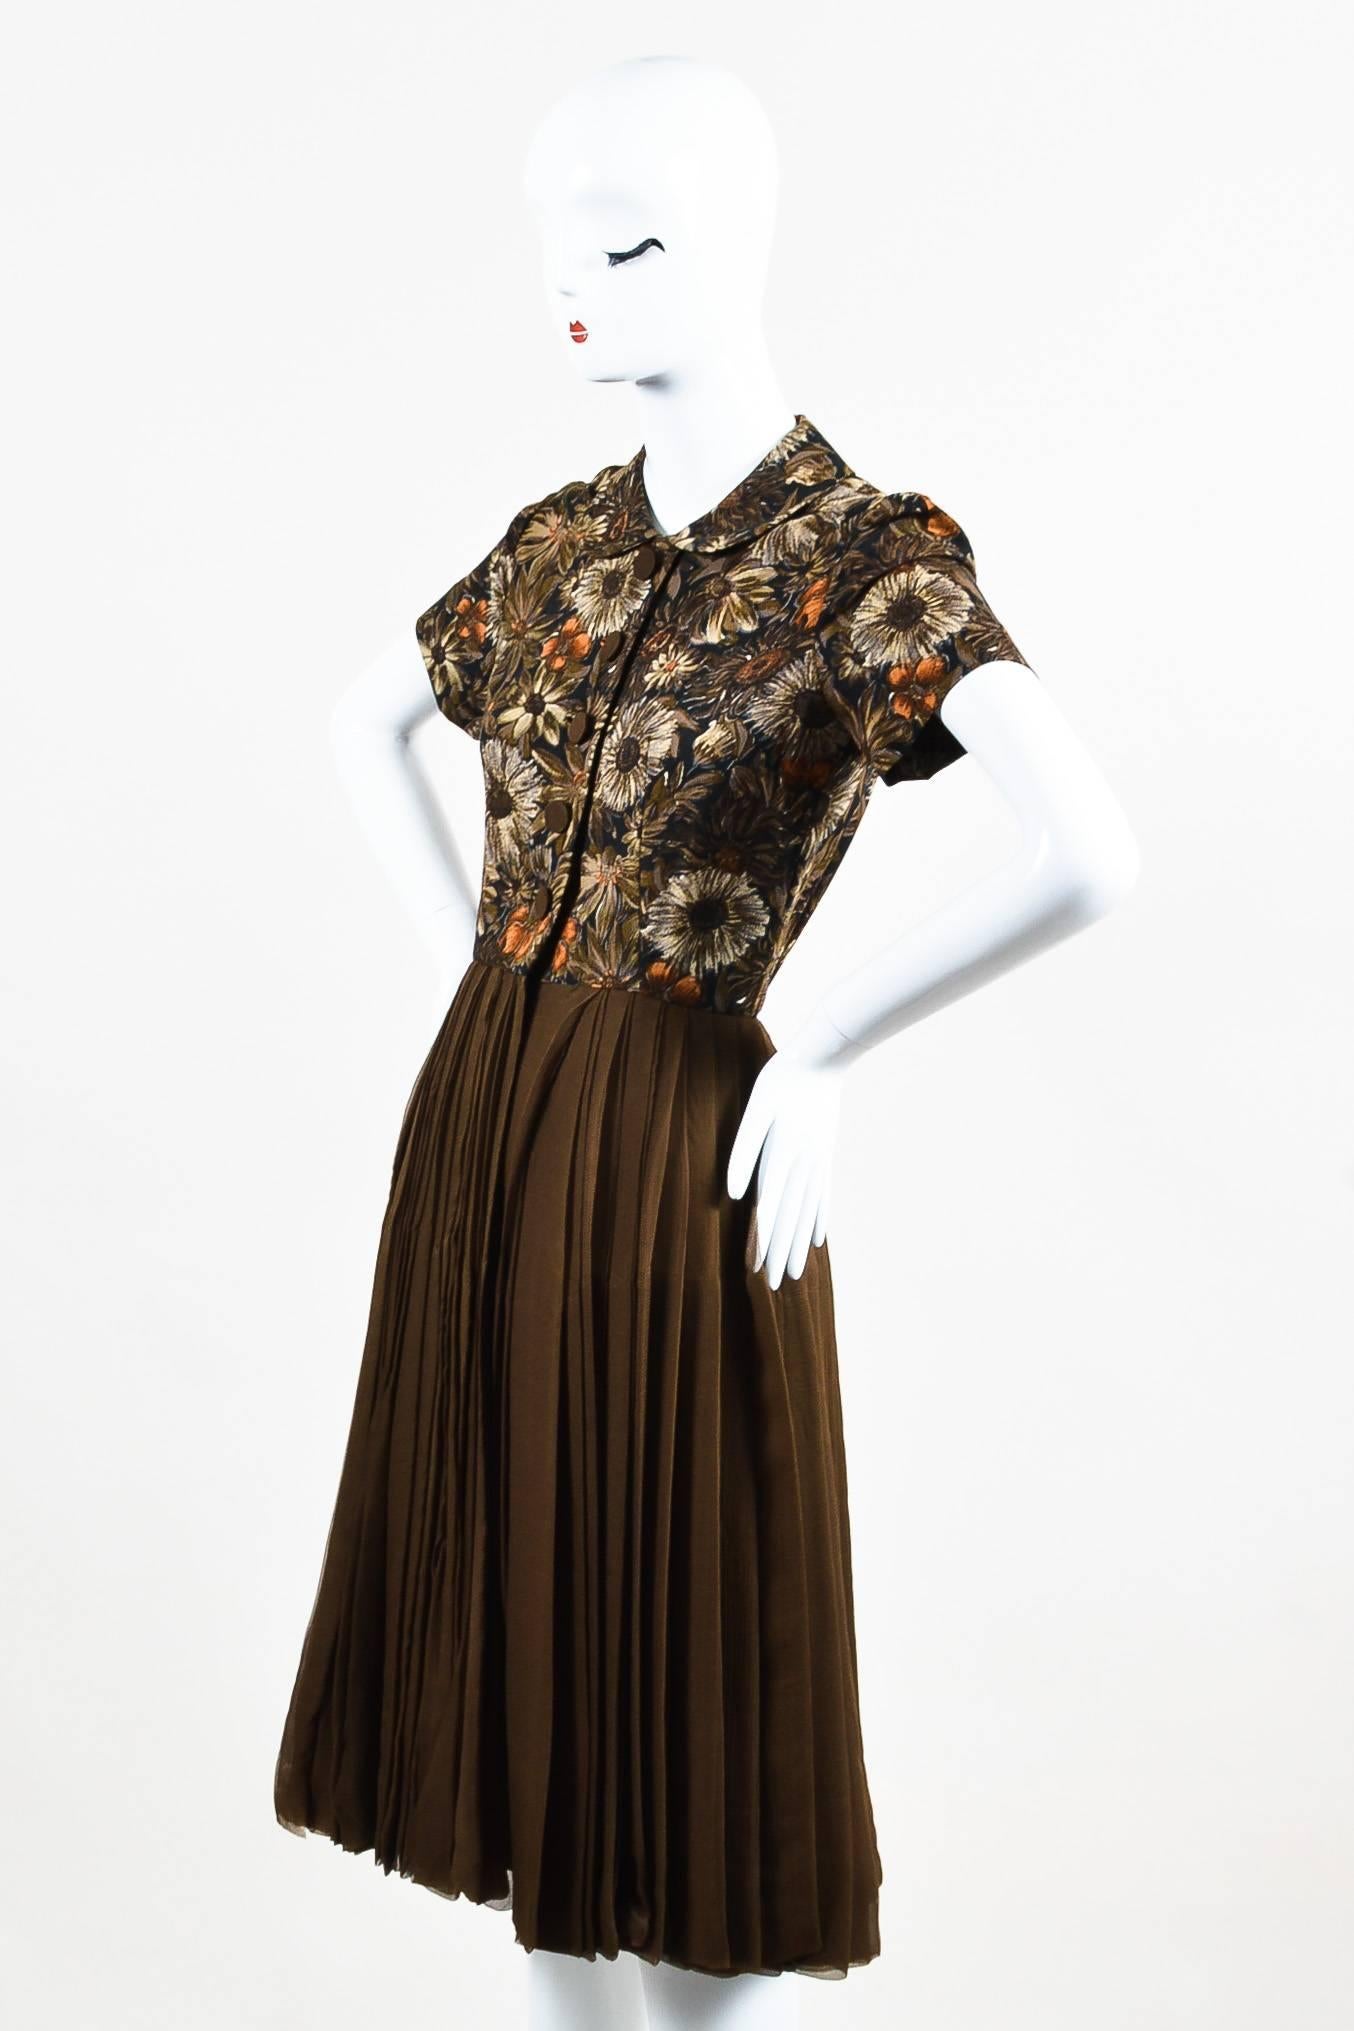 Vintage collared short sleeve button down dress from Henri Bendel. Rounded collar. Buttons down the front of shirt for closure. Navy, brown, and burnt orange floral print on the shirt. Zipper on the upper portion of skirt. Olive green pleated skirt.